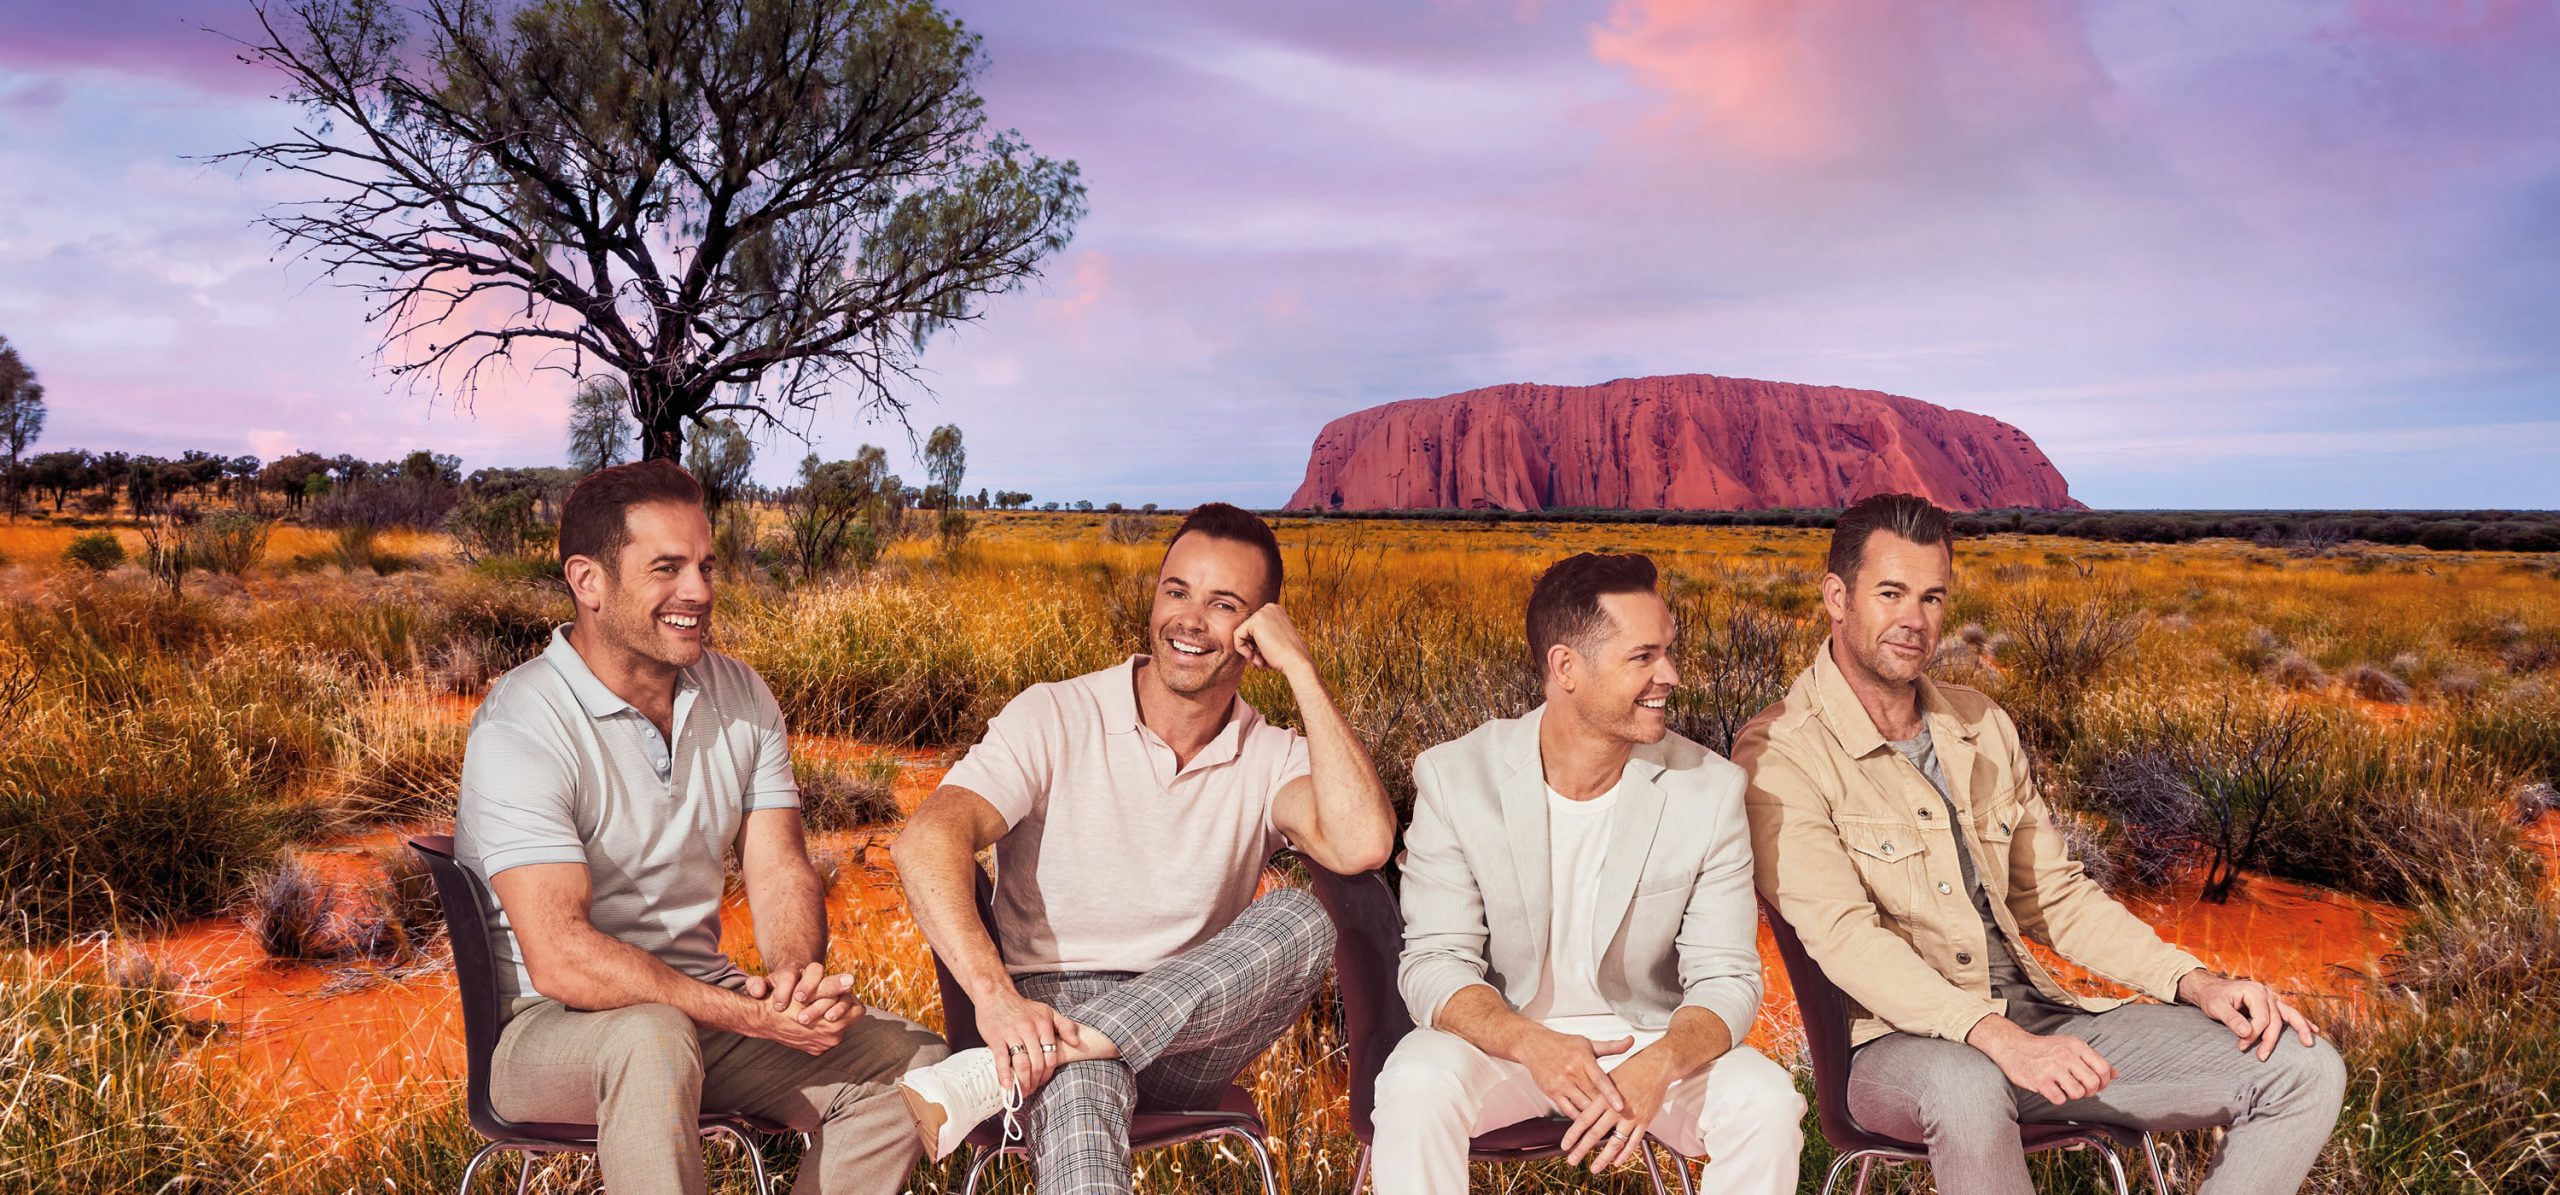 Watch Human Nature sing your favourite hits in the magical setting of Uluru